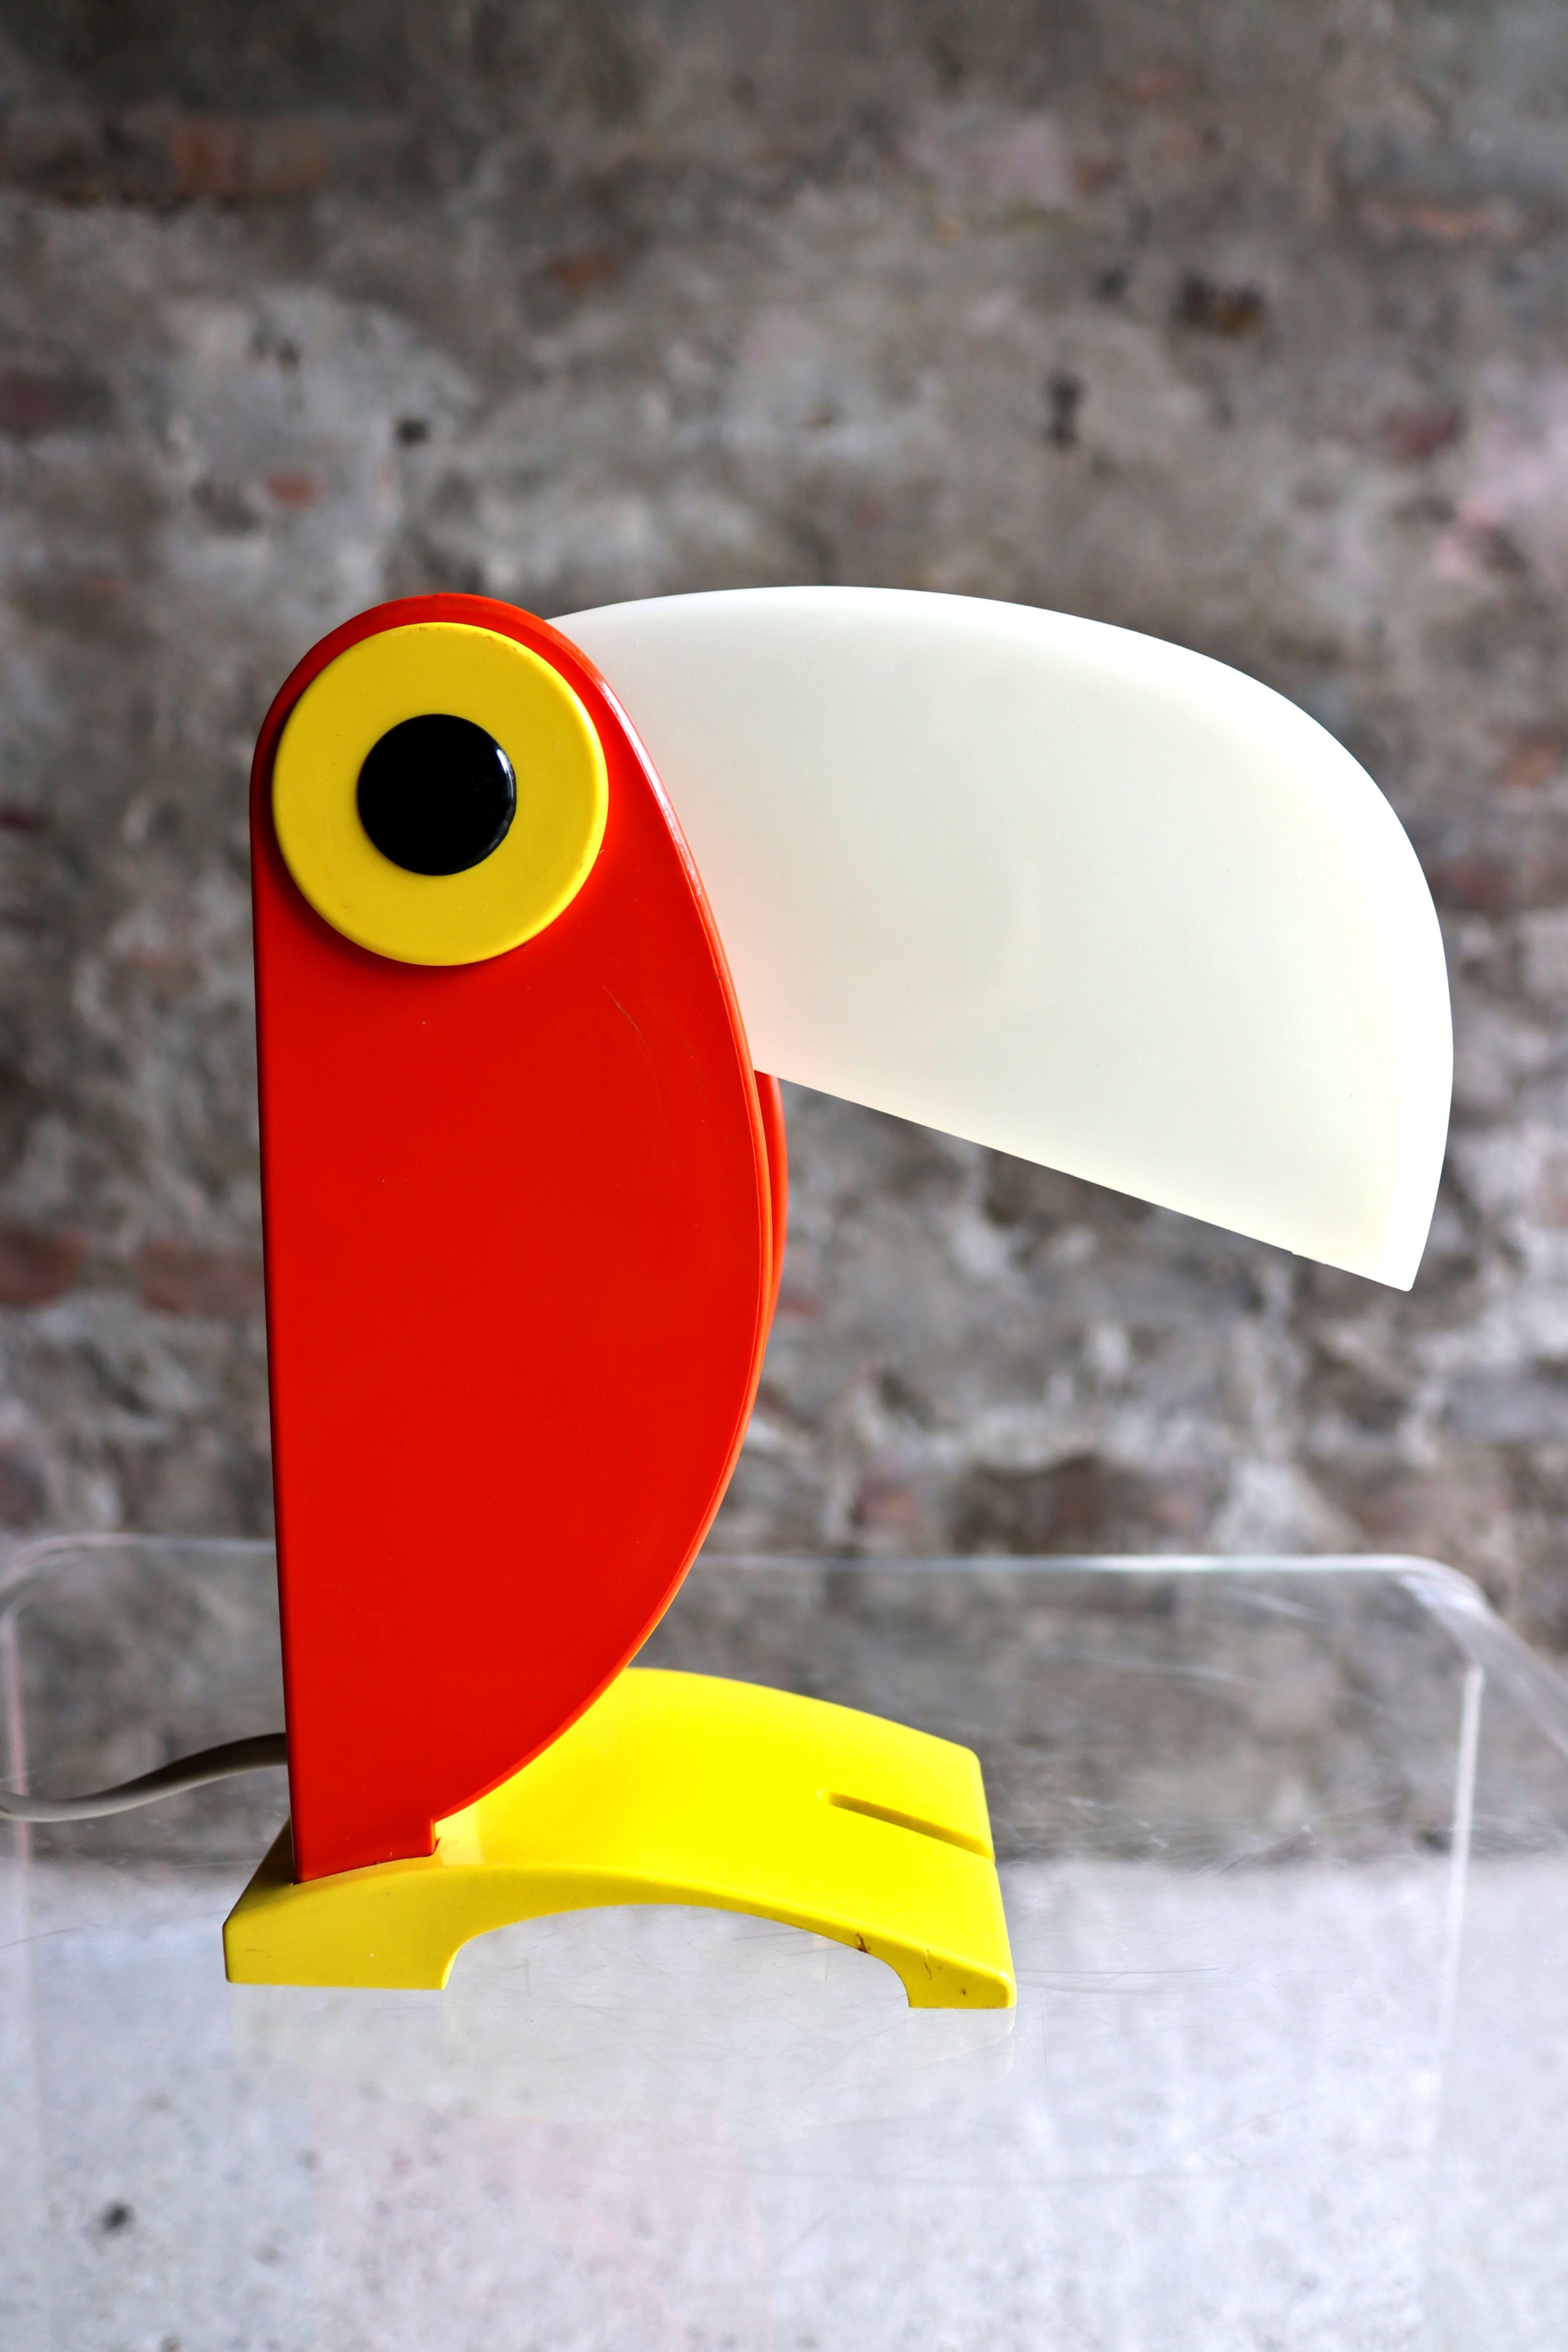 In 1964, Enea Ferrari, a young Veronese designer, founded Old Timer Ferrari, a company specializing in the production of objects, accessories and lighting fixtures. In 1970, he launched the Toucan Lamp, the first children’s lamp made of